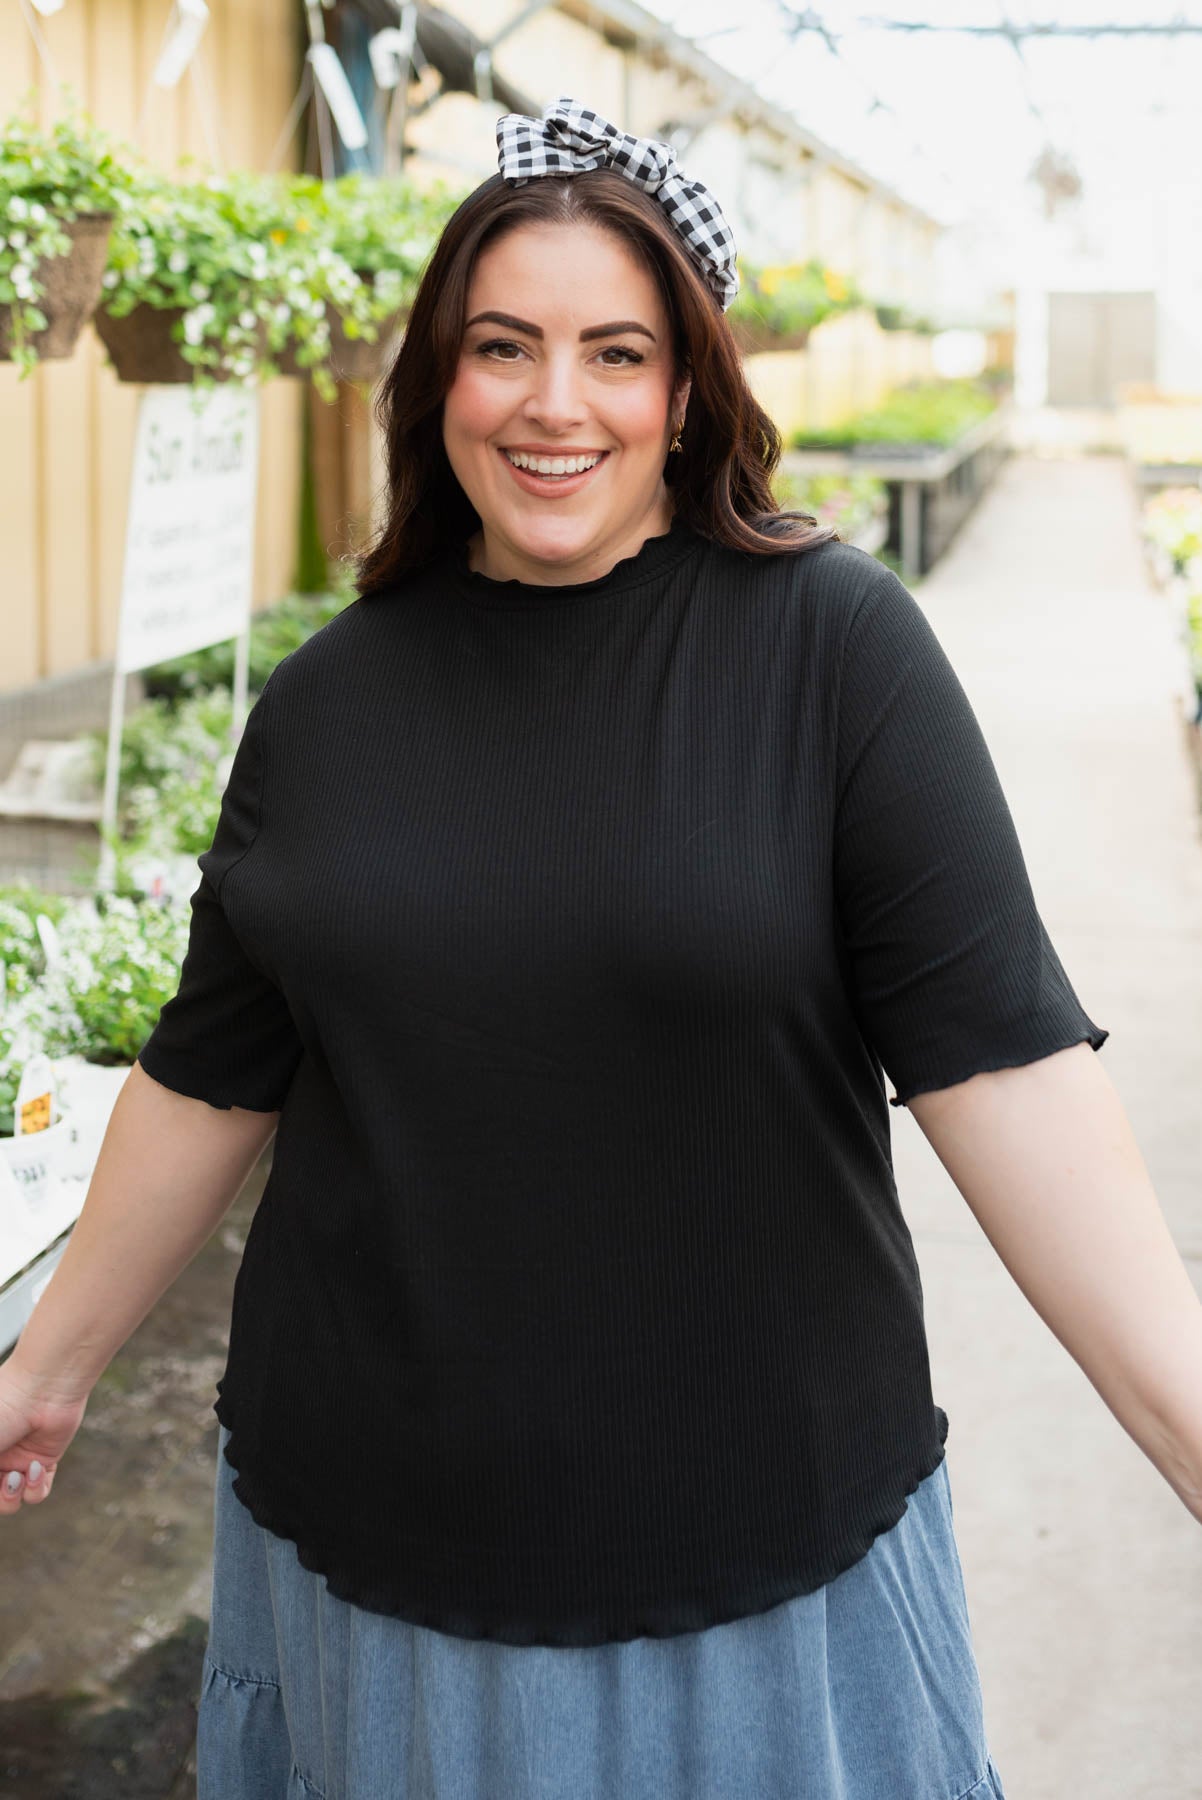 Plus size black textured knit top with short sleeves